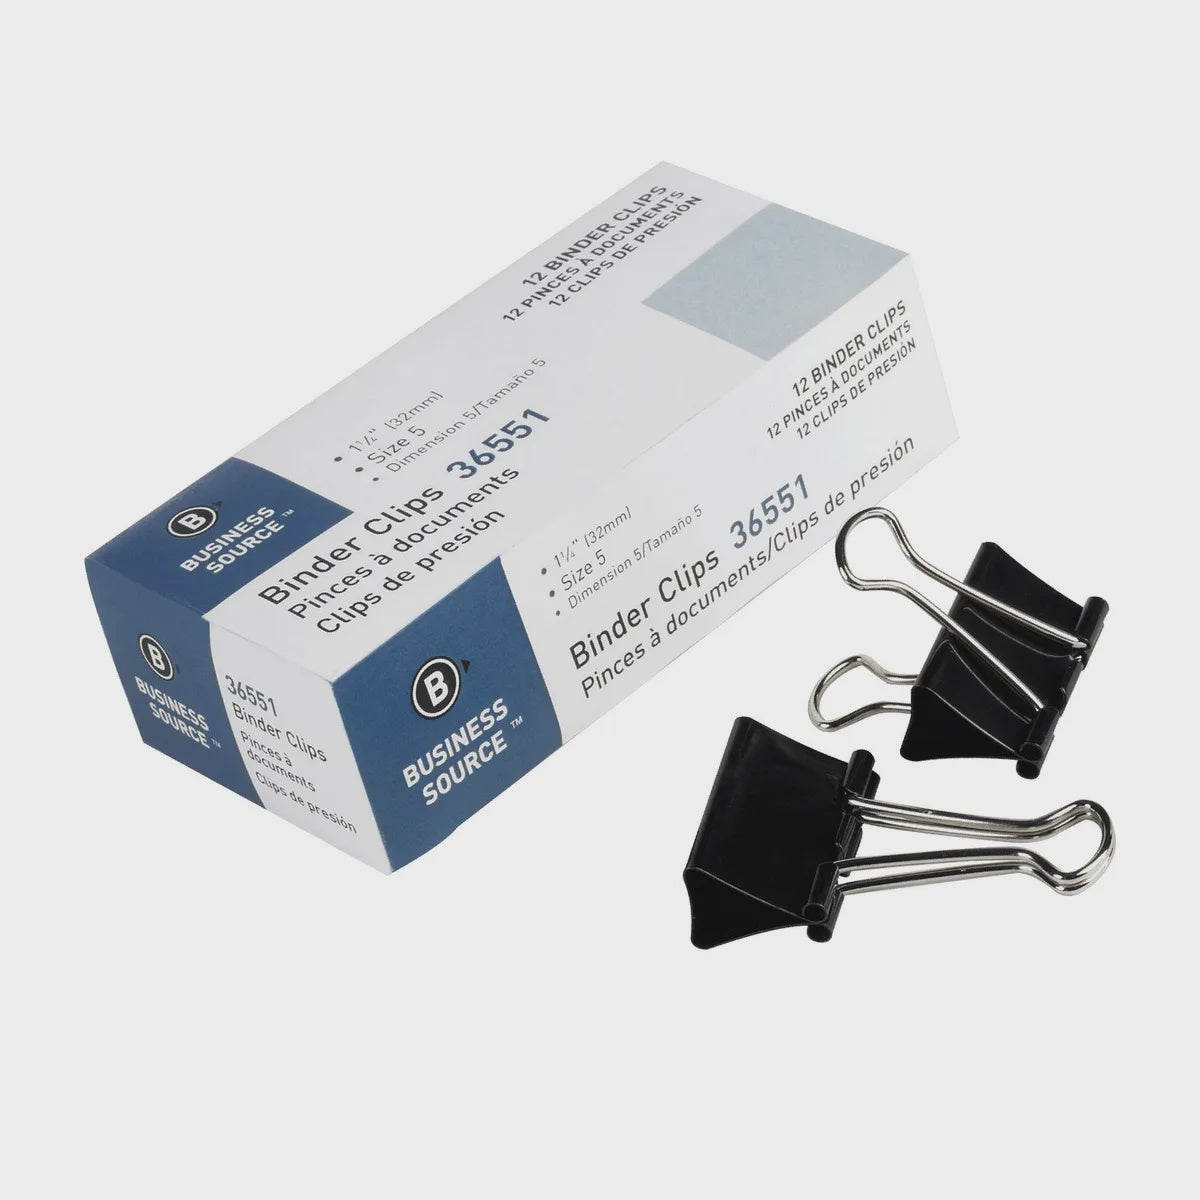 Business Source Binder Clips 1.25" 12 Pack